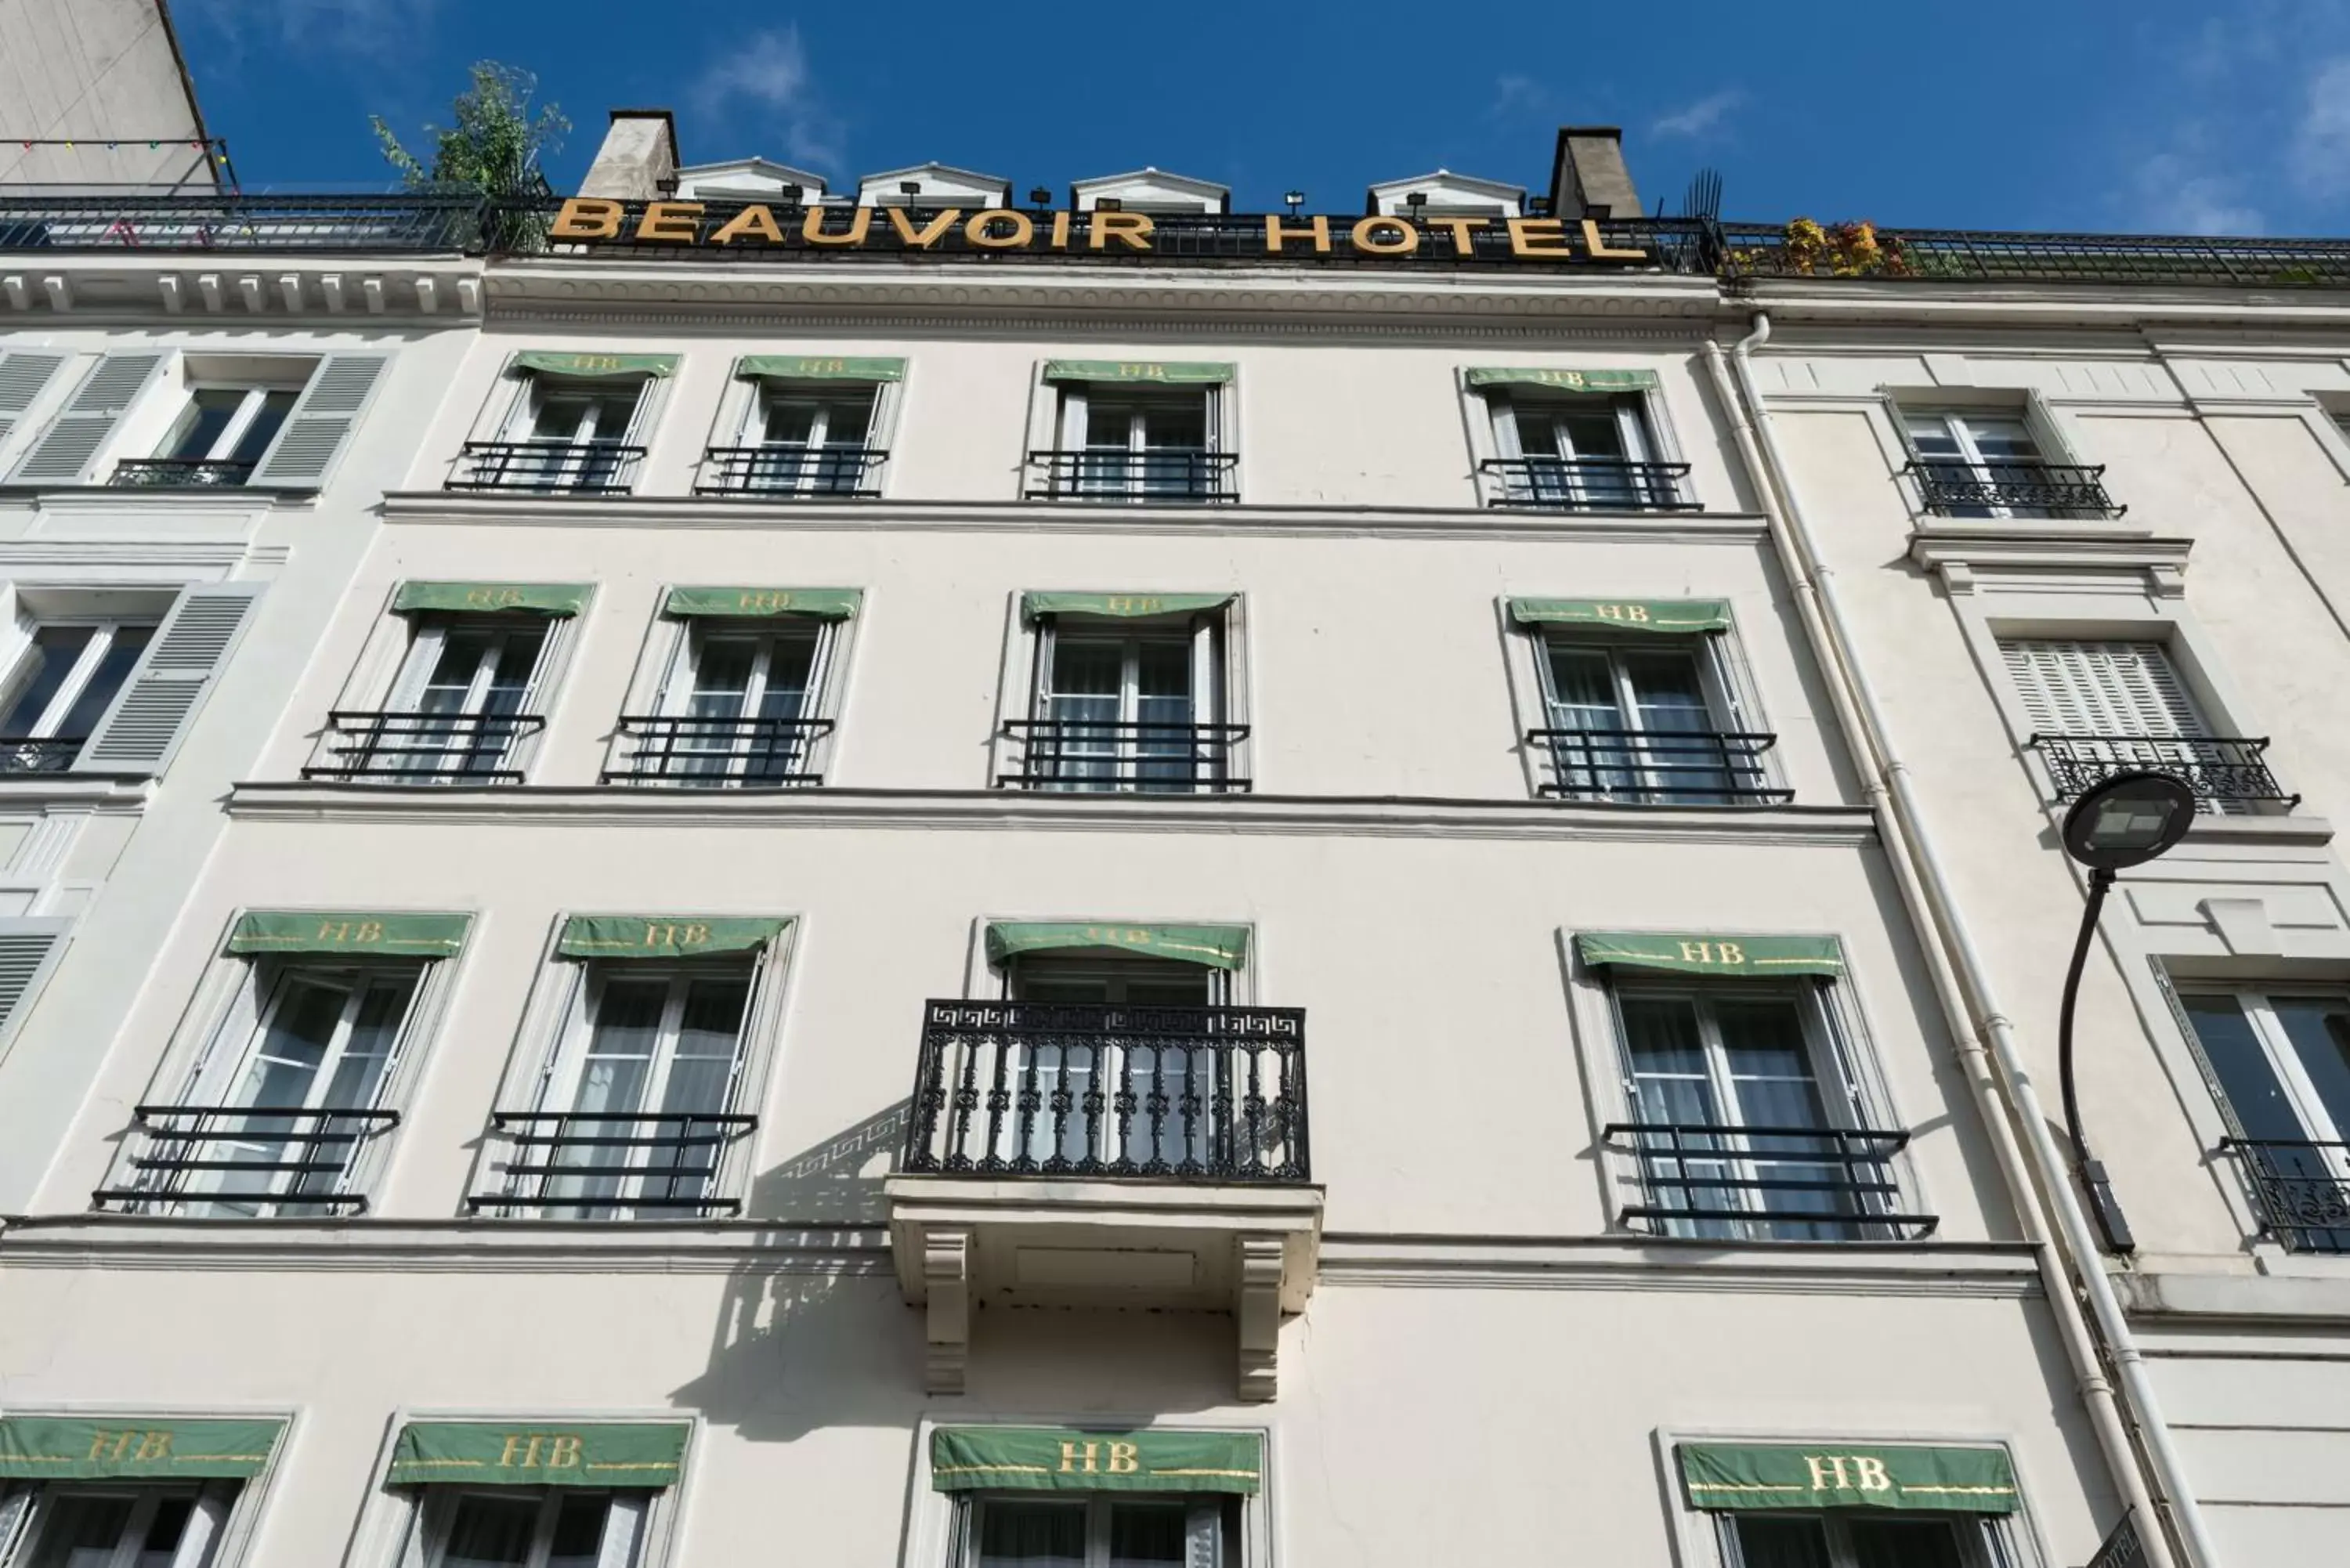 Property Building in Hotel Beauvoir